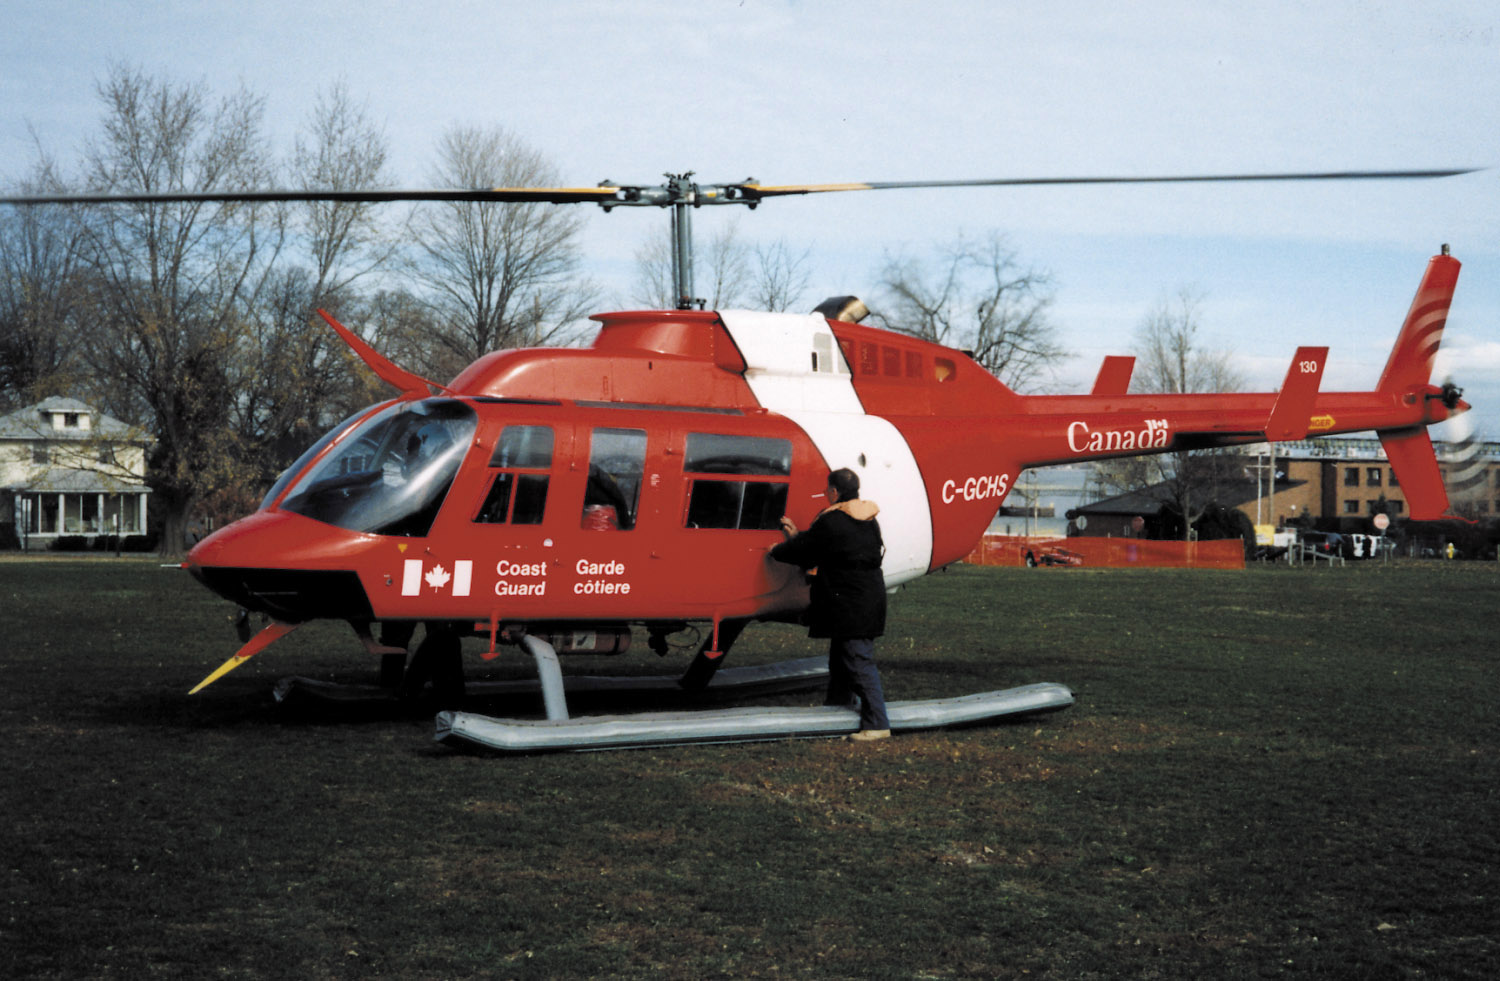 Canadian_Coast_Guard_Helicopter_delivers_patient_to_USA.jpg